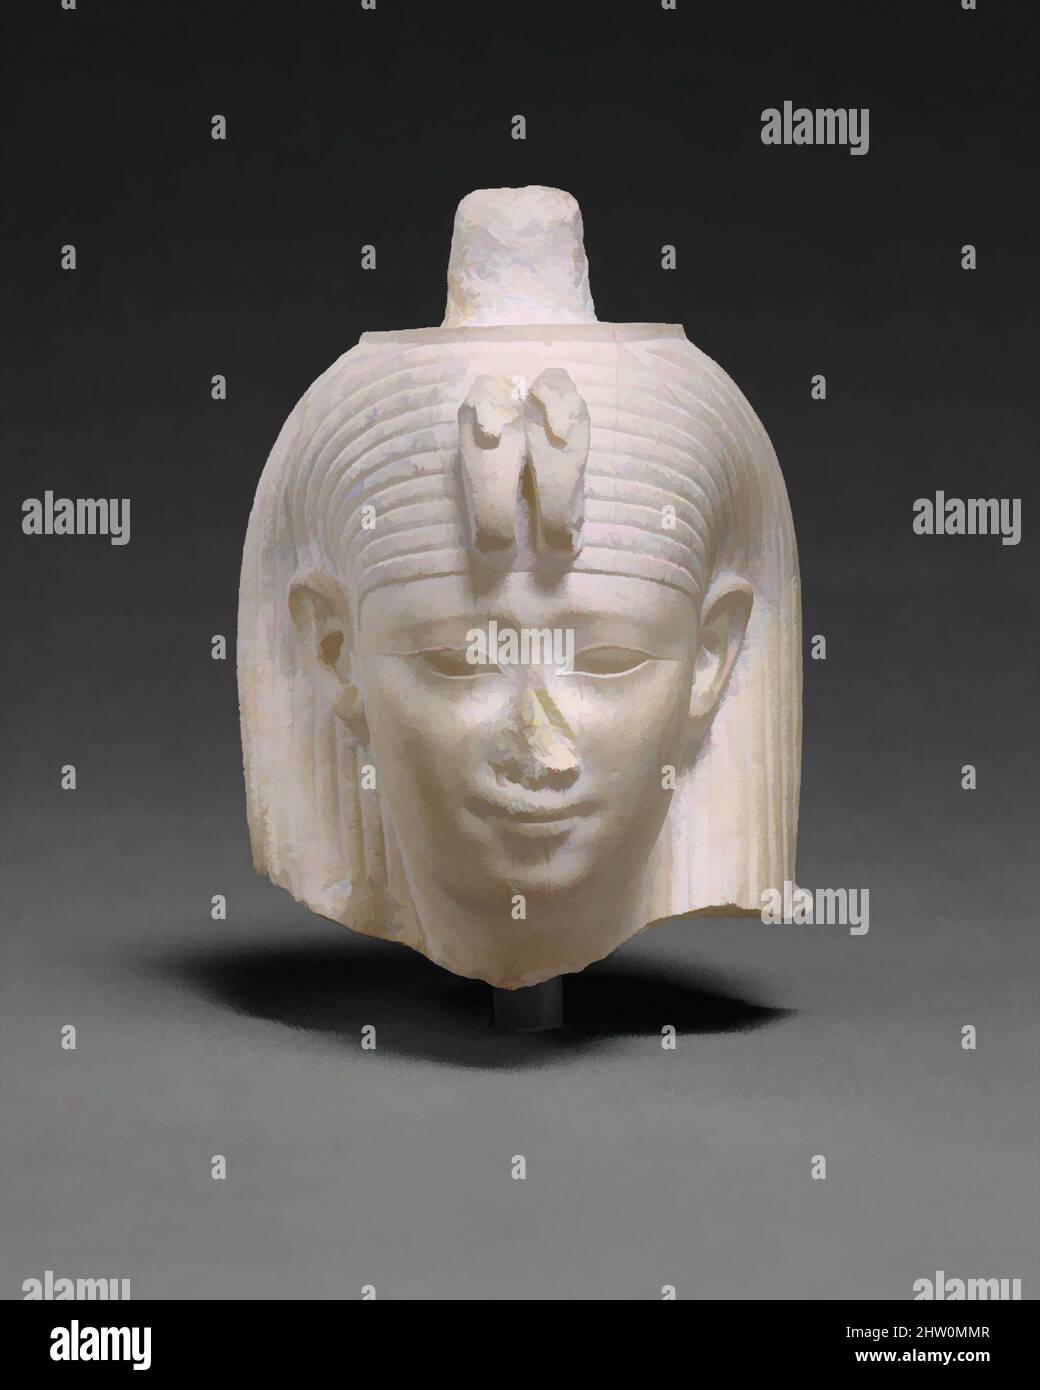 Art inspired by Head Attributed to Arsinoe II, Ptolemaic Period, 278–270 B.C., From Egypt, Memphite Region, Abu Rawash, IFAO excavations 1922-1923, Limestone (Indurated), H. 12 cm (4 3/4 in); W. 9 cm (3 9/16 in); D. 9 cm (3 9/16 in), This small head was created in the early part of the, Classic works modernized by Artotop with a splash of modernity. Shapes, color and value, eye-catching visual impact on art. Emotions through freedom of artworks in a contemporary way. A timeless message pursuing a wildly creative new direction. Artists turning to the digital medium and creating the Artotop NFT Stock Photo